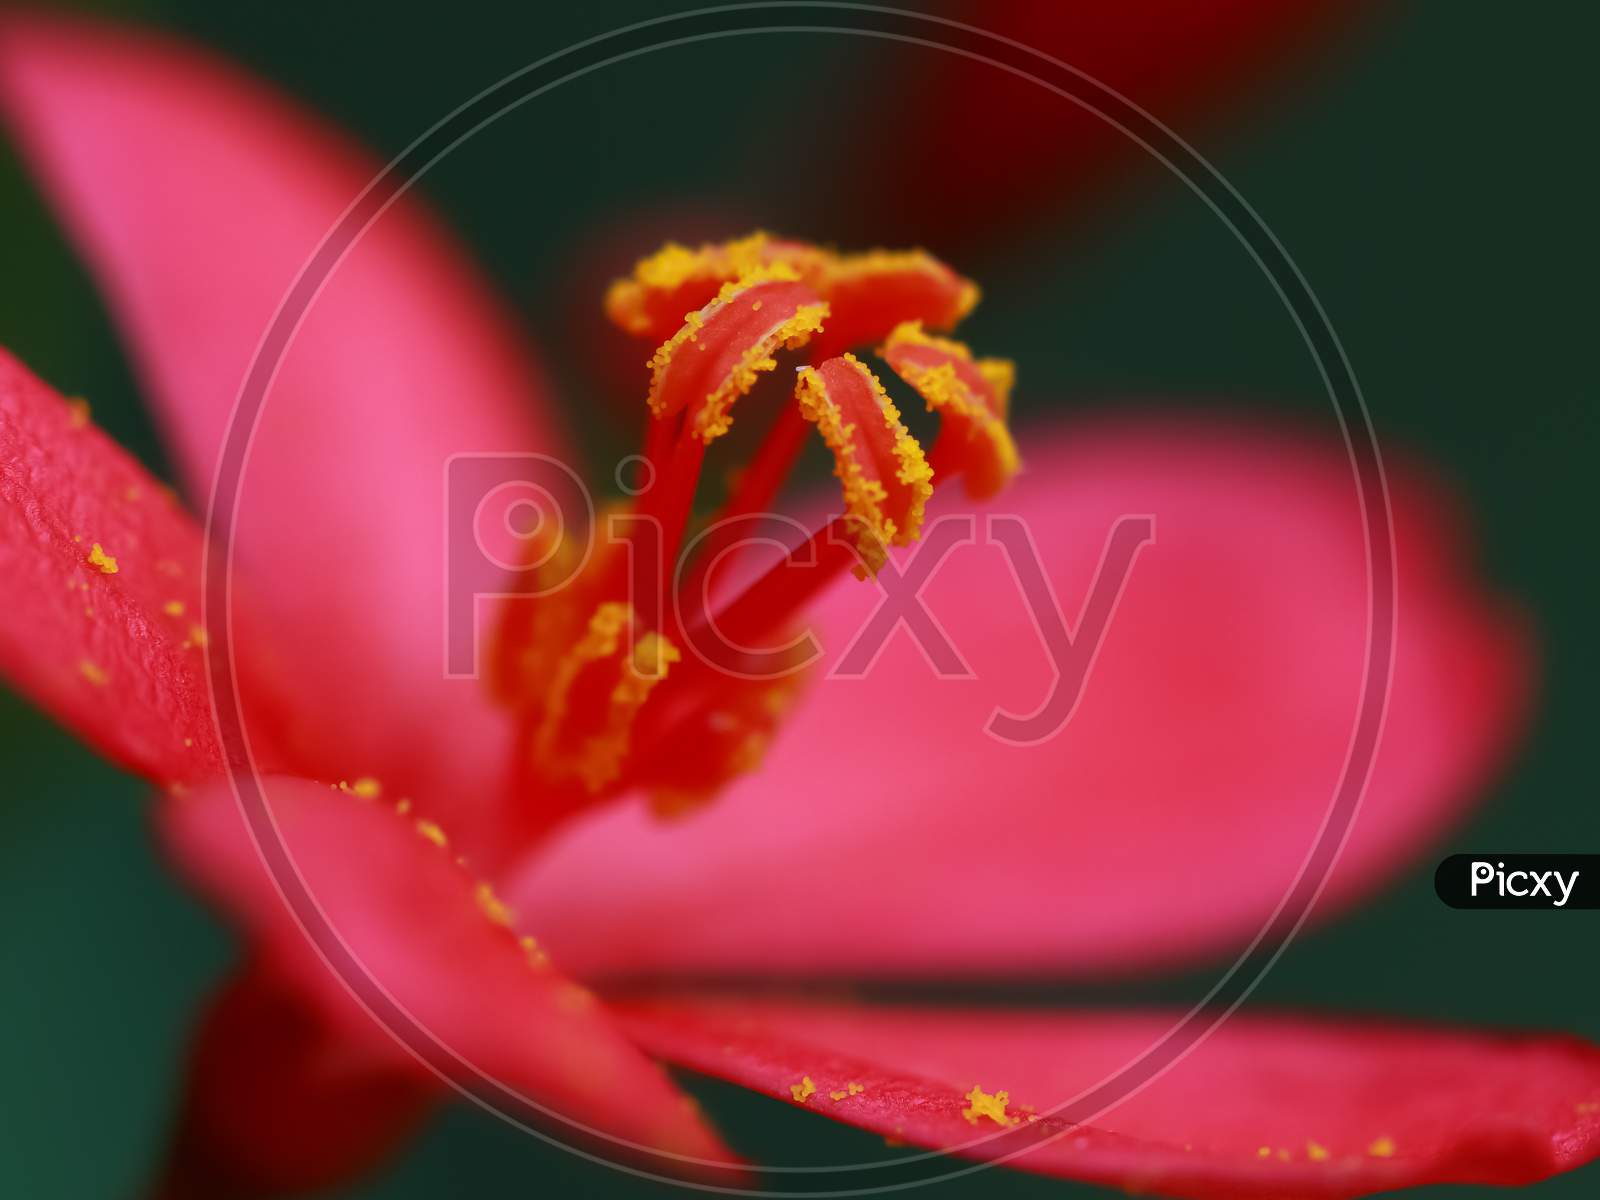 Macro image of a beautiful red flower with yellow pollen fallen on petals